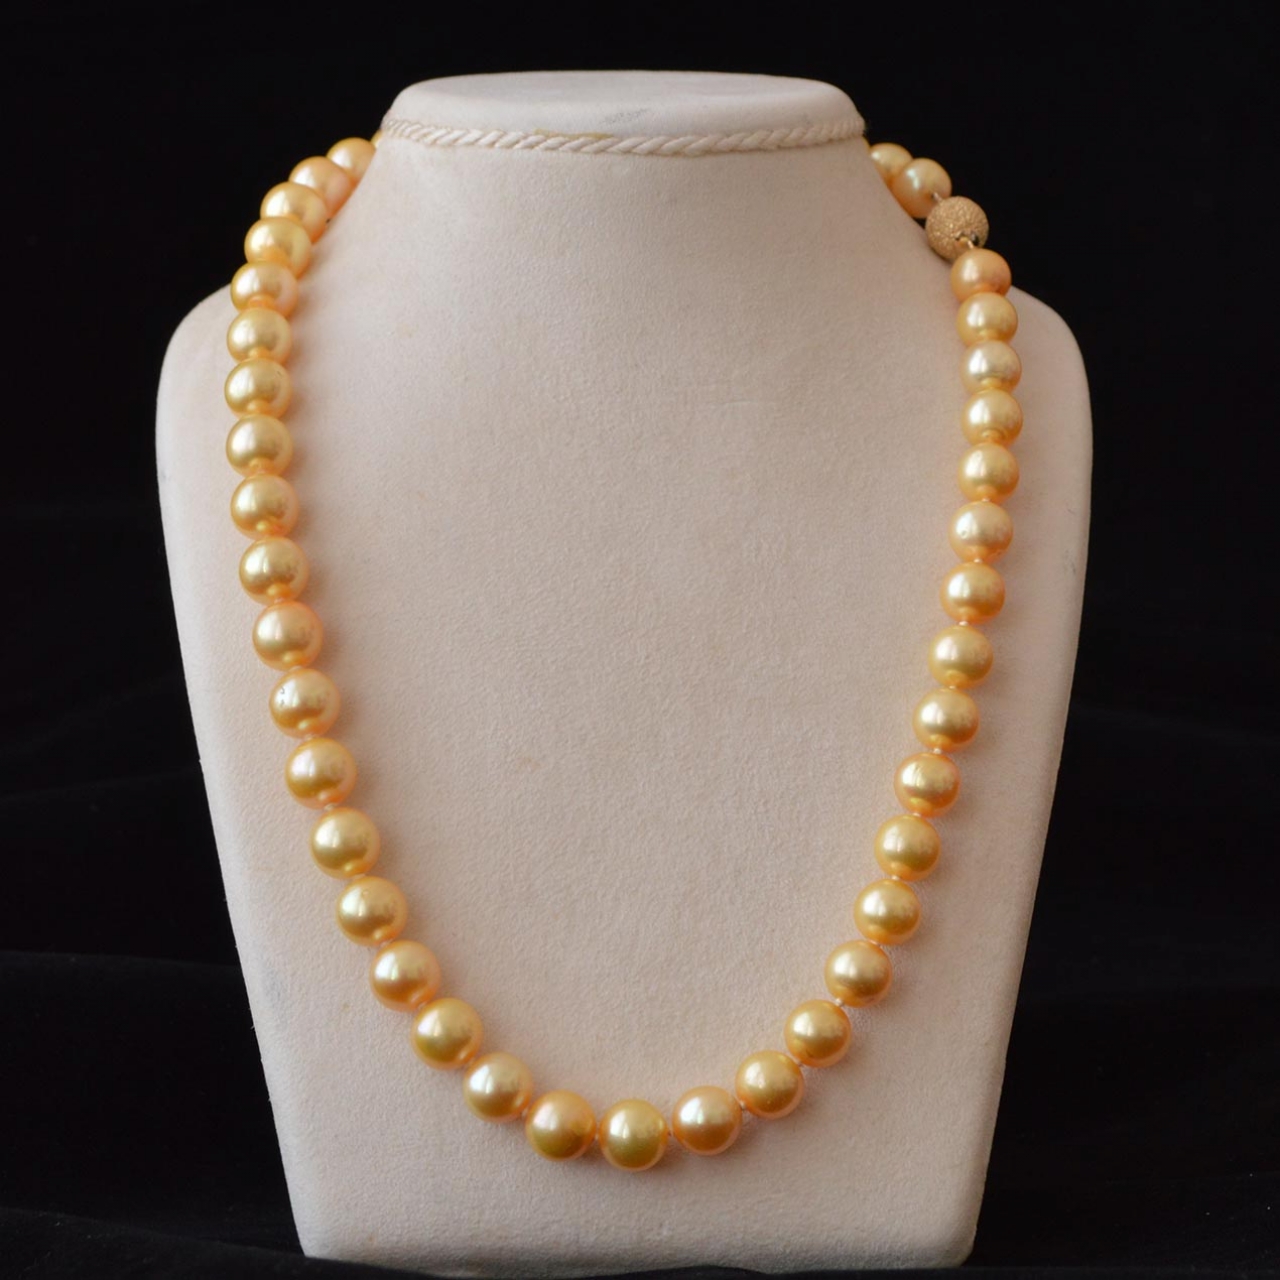 12-15mm Golden South Sea Pearl Necklace - AAA Quality - Pure Pearls